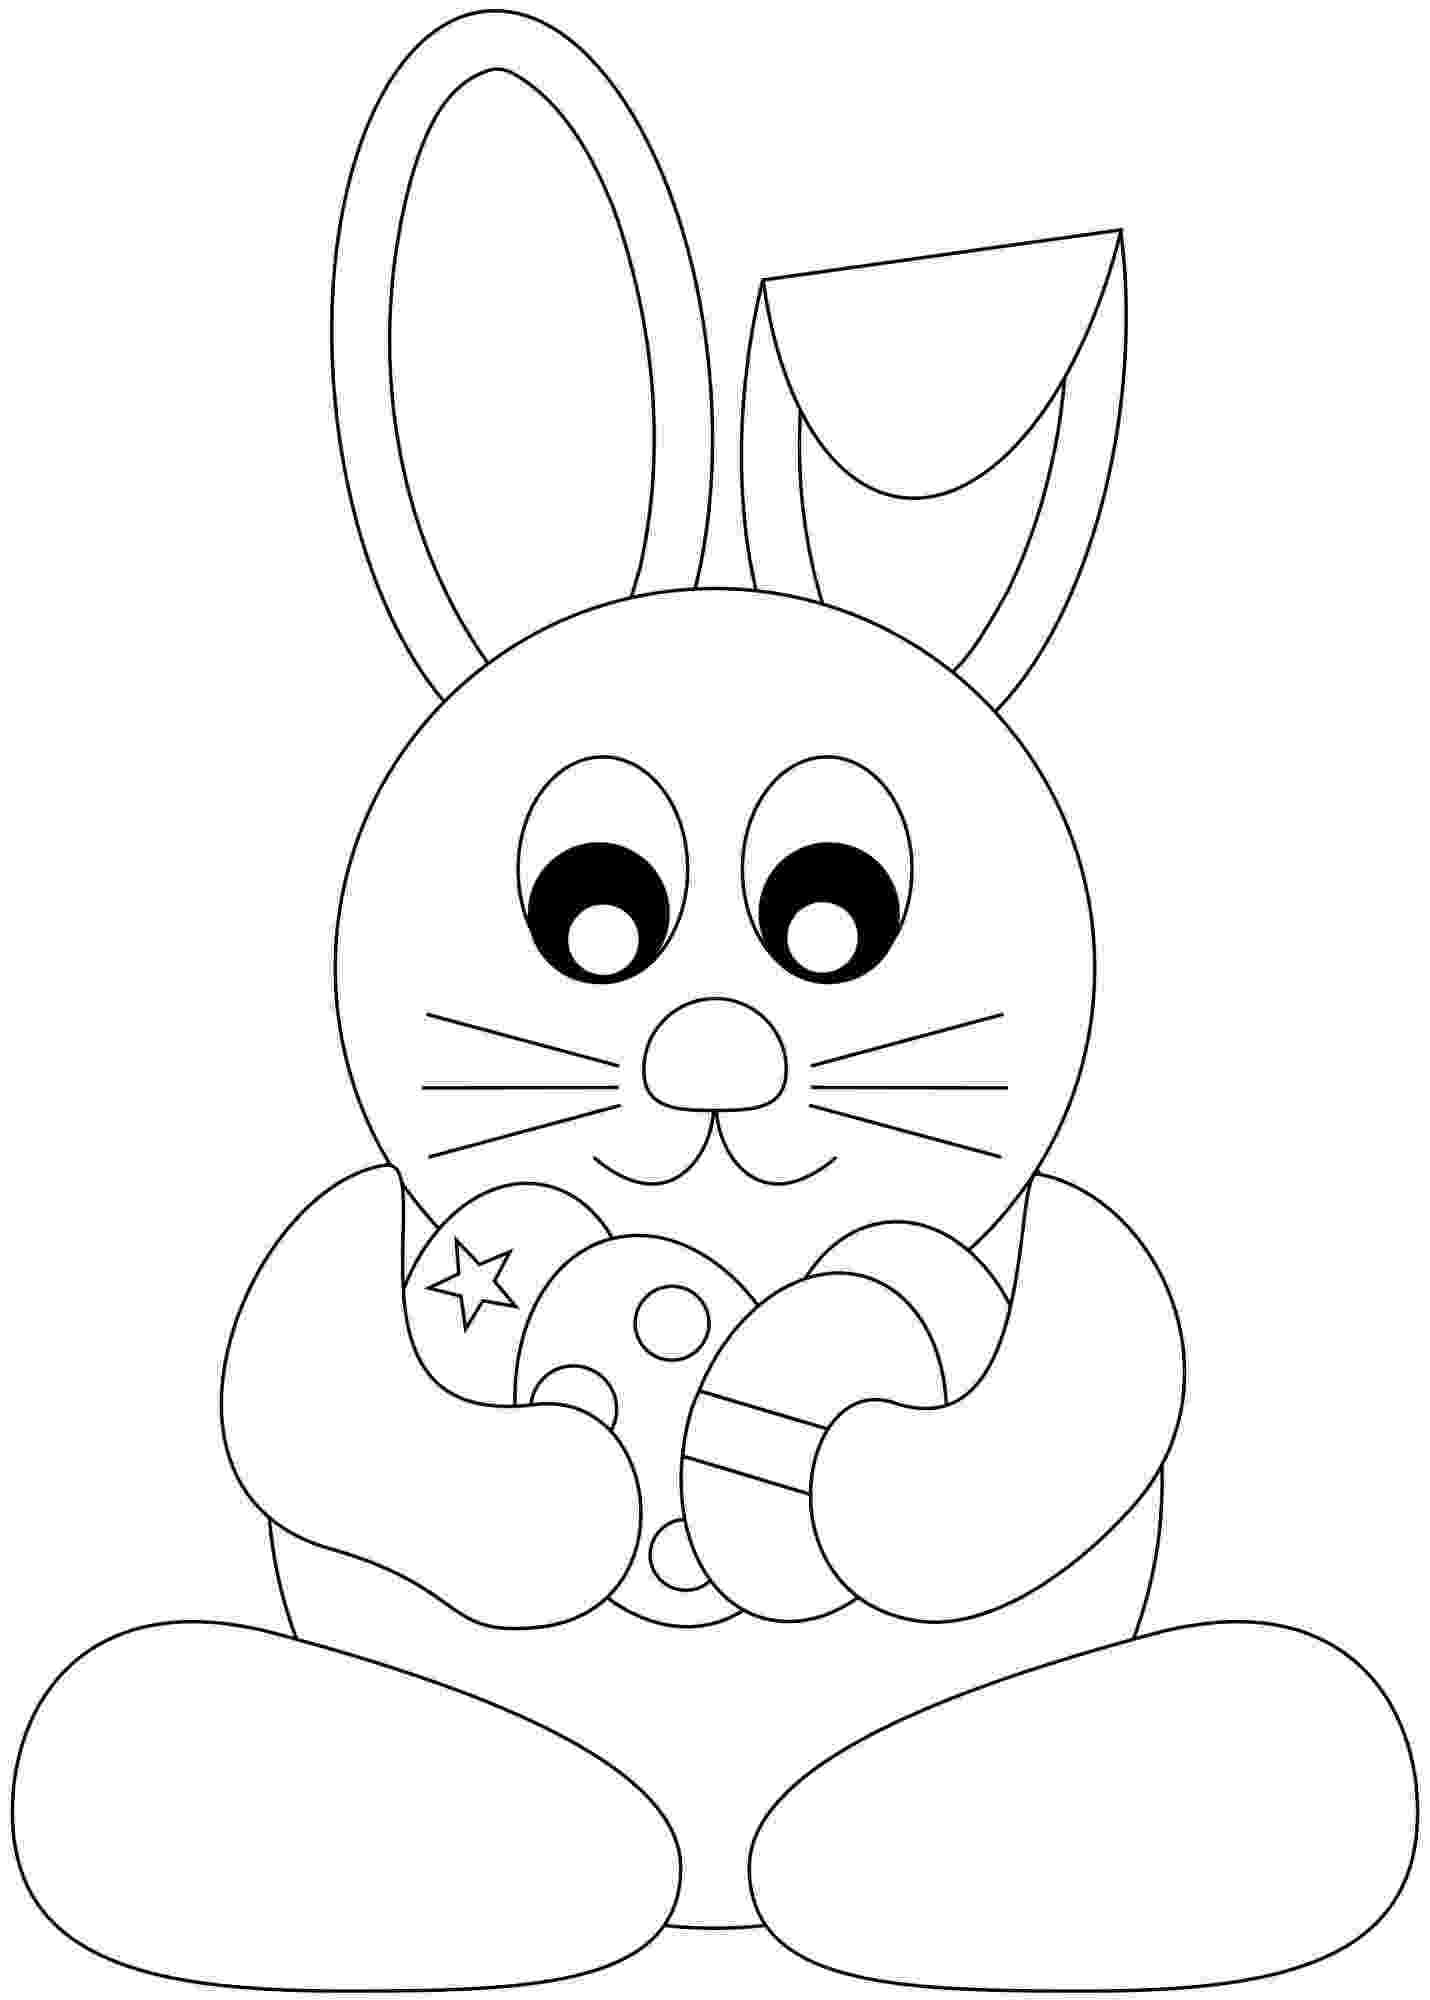 colouring easter bunny easter bunny coloring pages to print to download and print easter bunny colouring 1 1